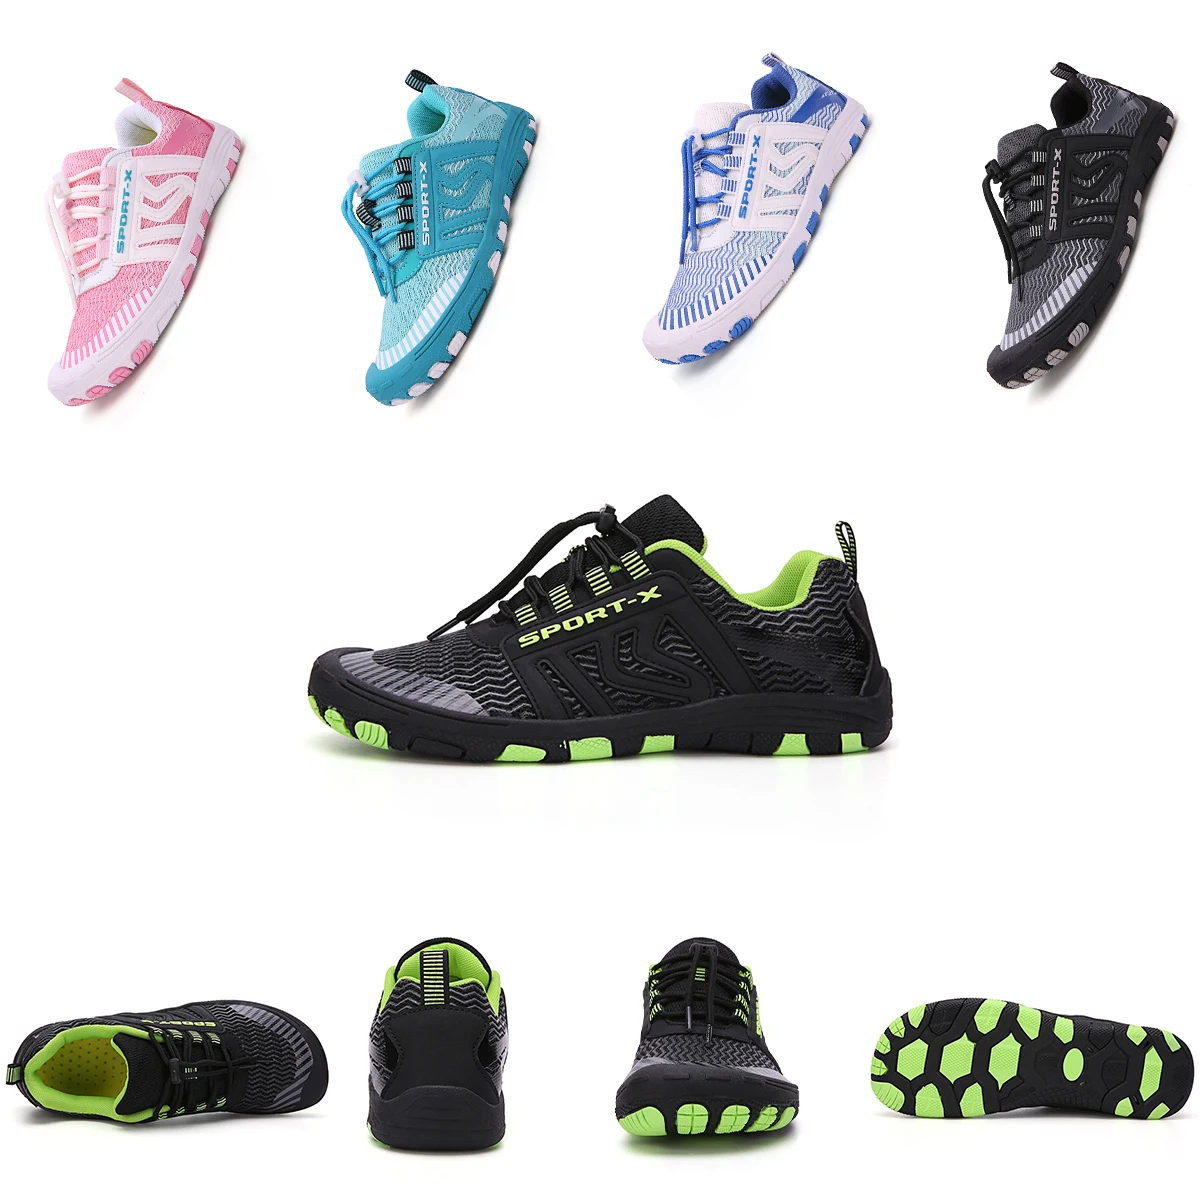 

2022 New Adult Wading Shoes Men's Hiking Shoes Five Fingers Shoes Cycling Shoes Women's Outdoor Hiking Shoes Climbing Shoes35-47